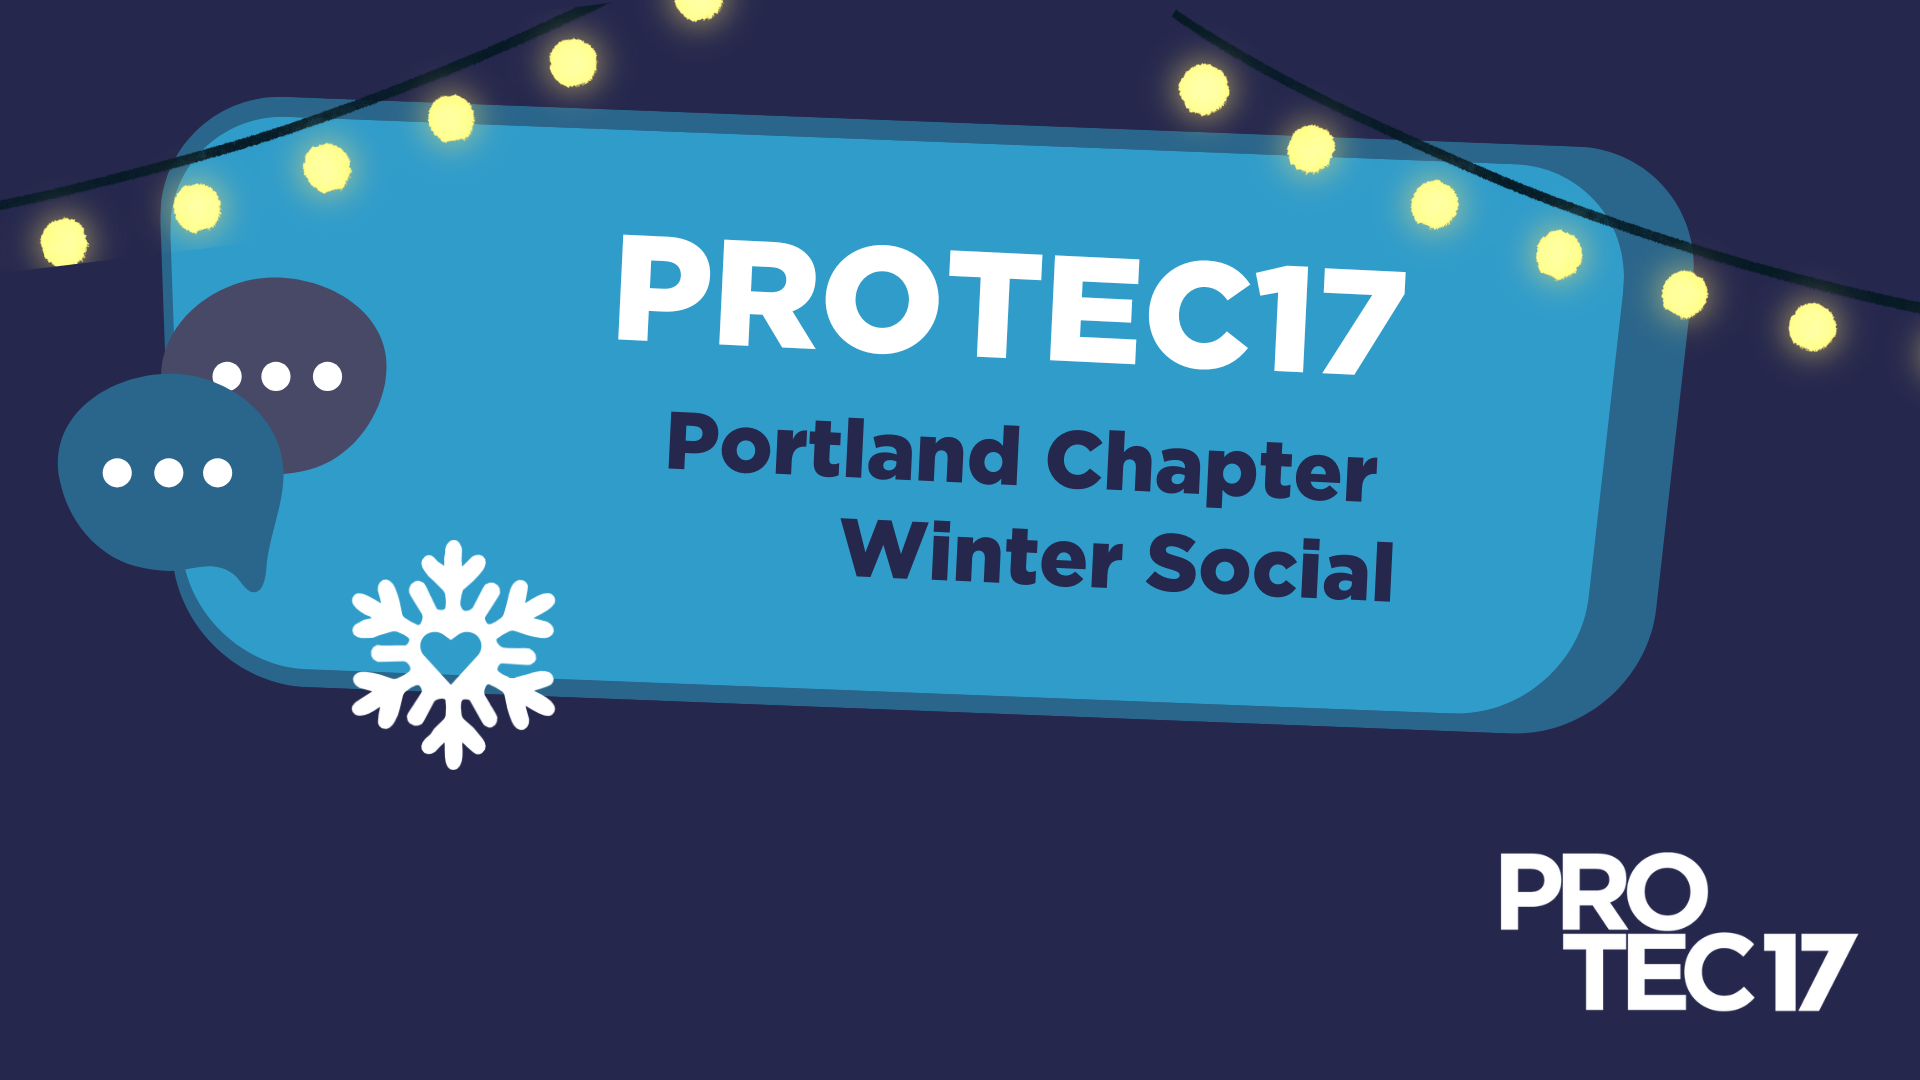 Image that reads, "PROTEC17 Portland Chapter Winter Social." There are illustrated images of string lights, a chat bubble, a snowflake with a heart cutout in the middle, and the PROTEC17 logo.